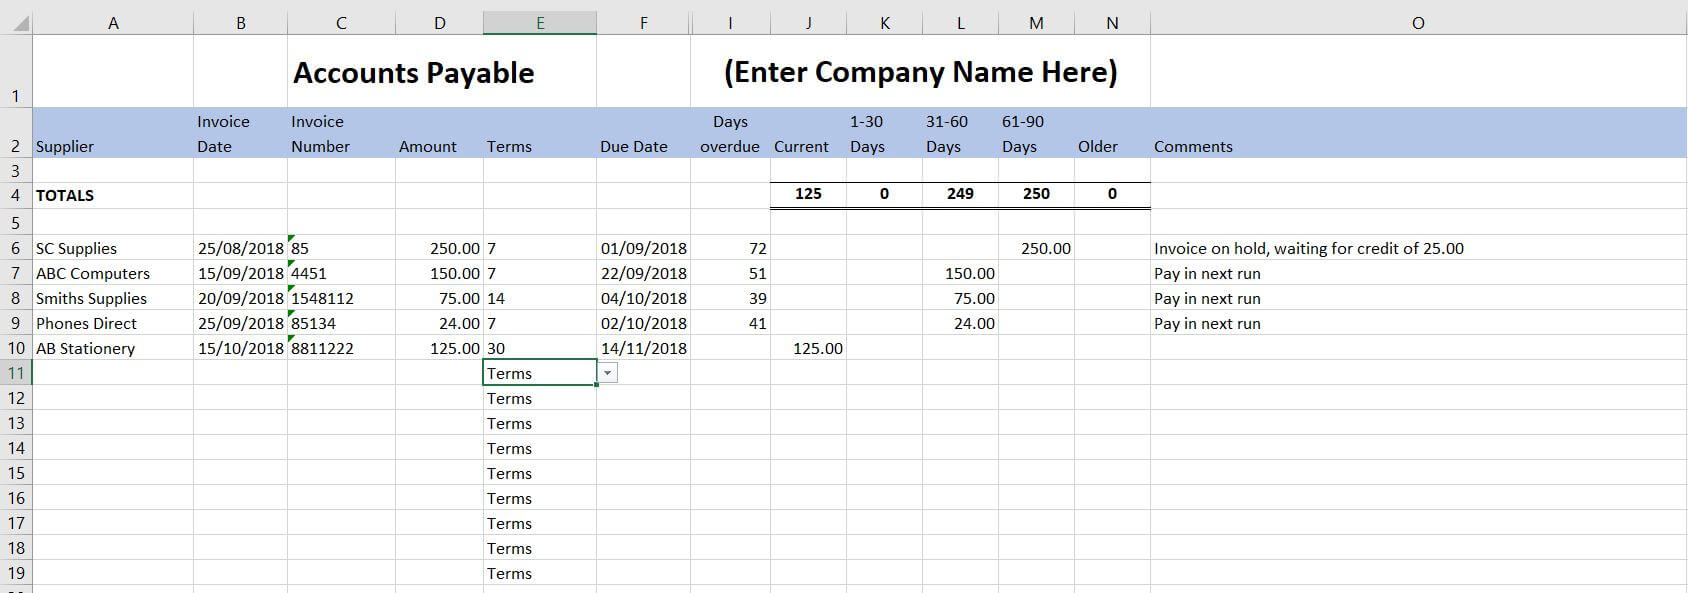 Free Excel Bookkeeping Templates – 14 Accounts Spreadsheets With Regard To Business Ledger Template Excel Free